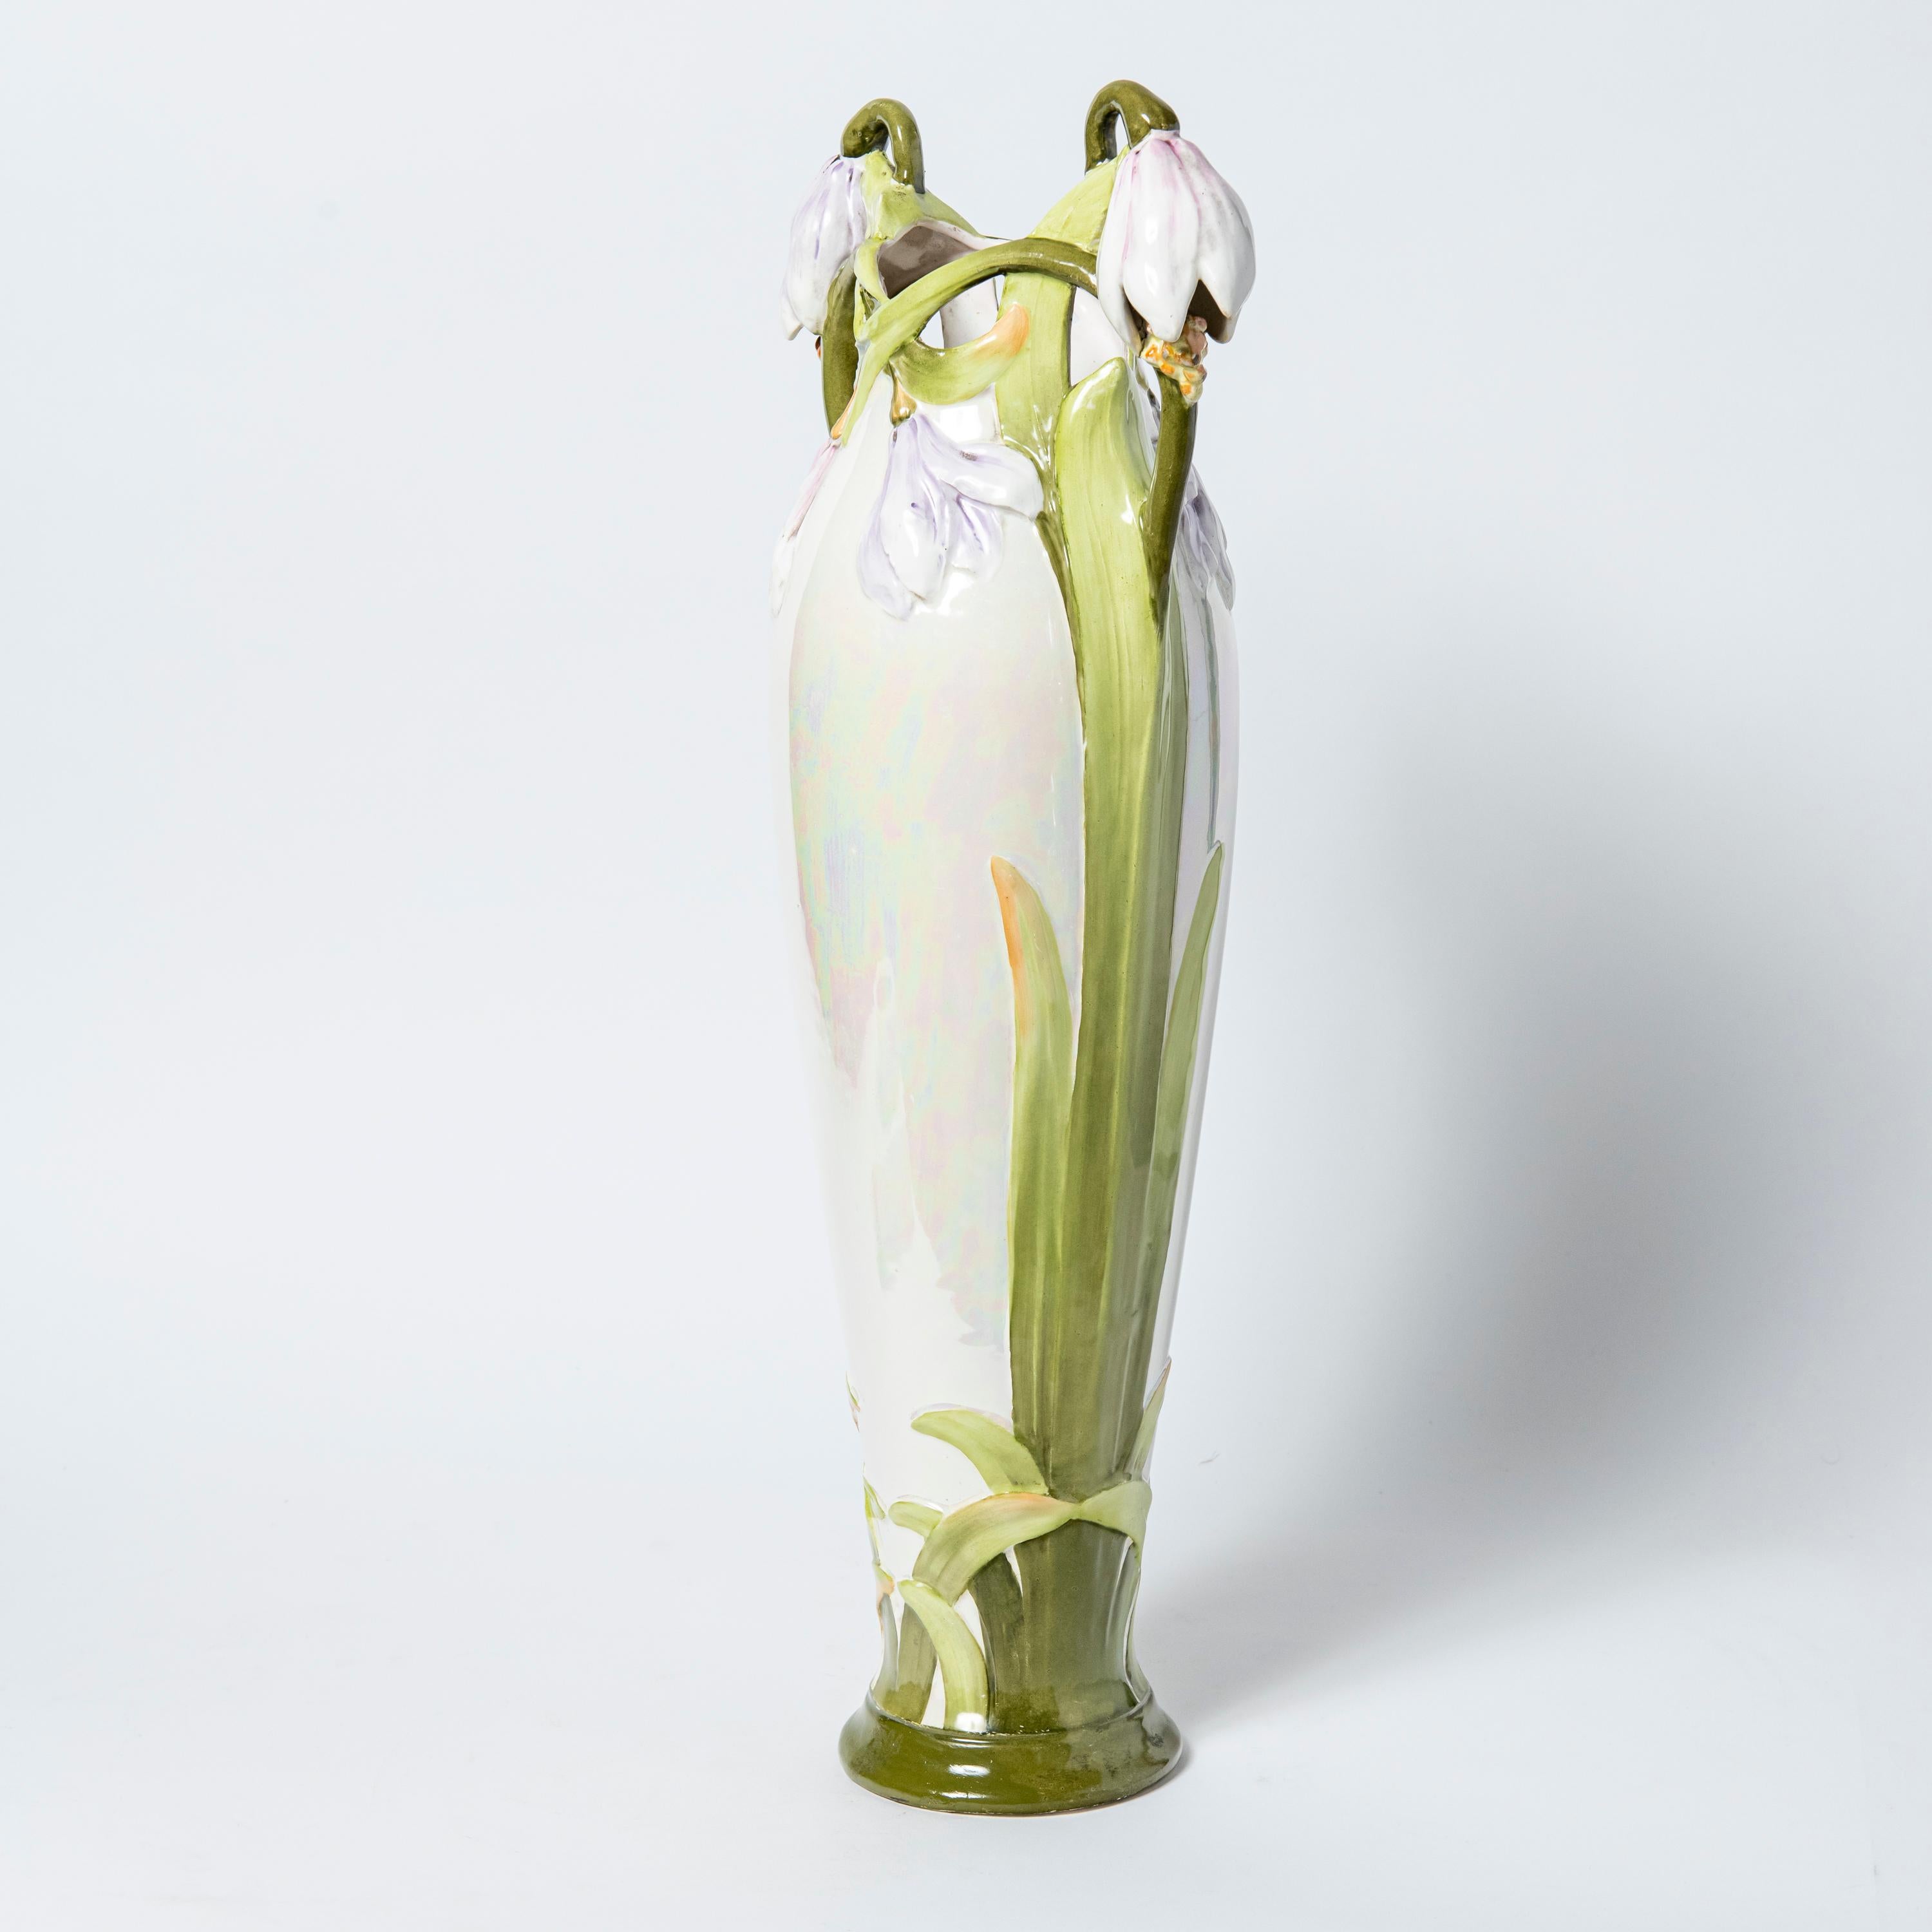 French  Glazed Ceramic vase, Art Nouveau Period, France, Early 20th Century. For Sale